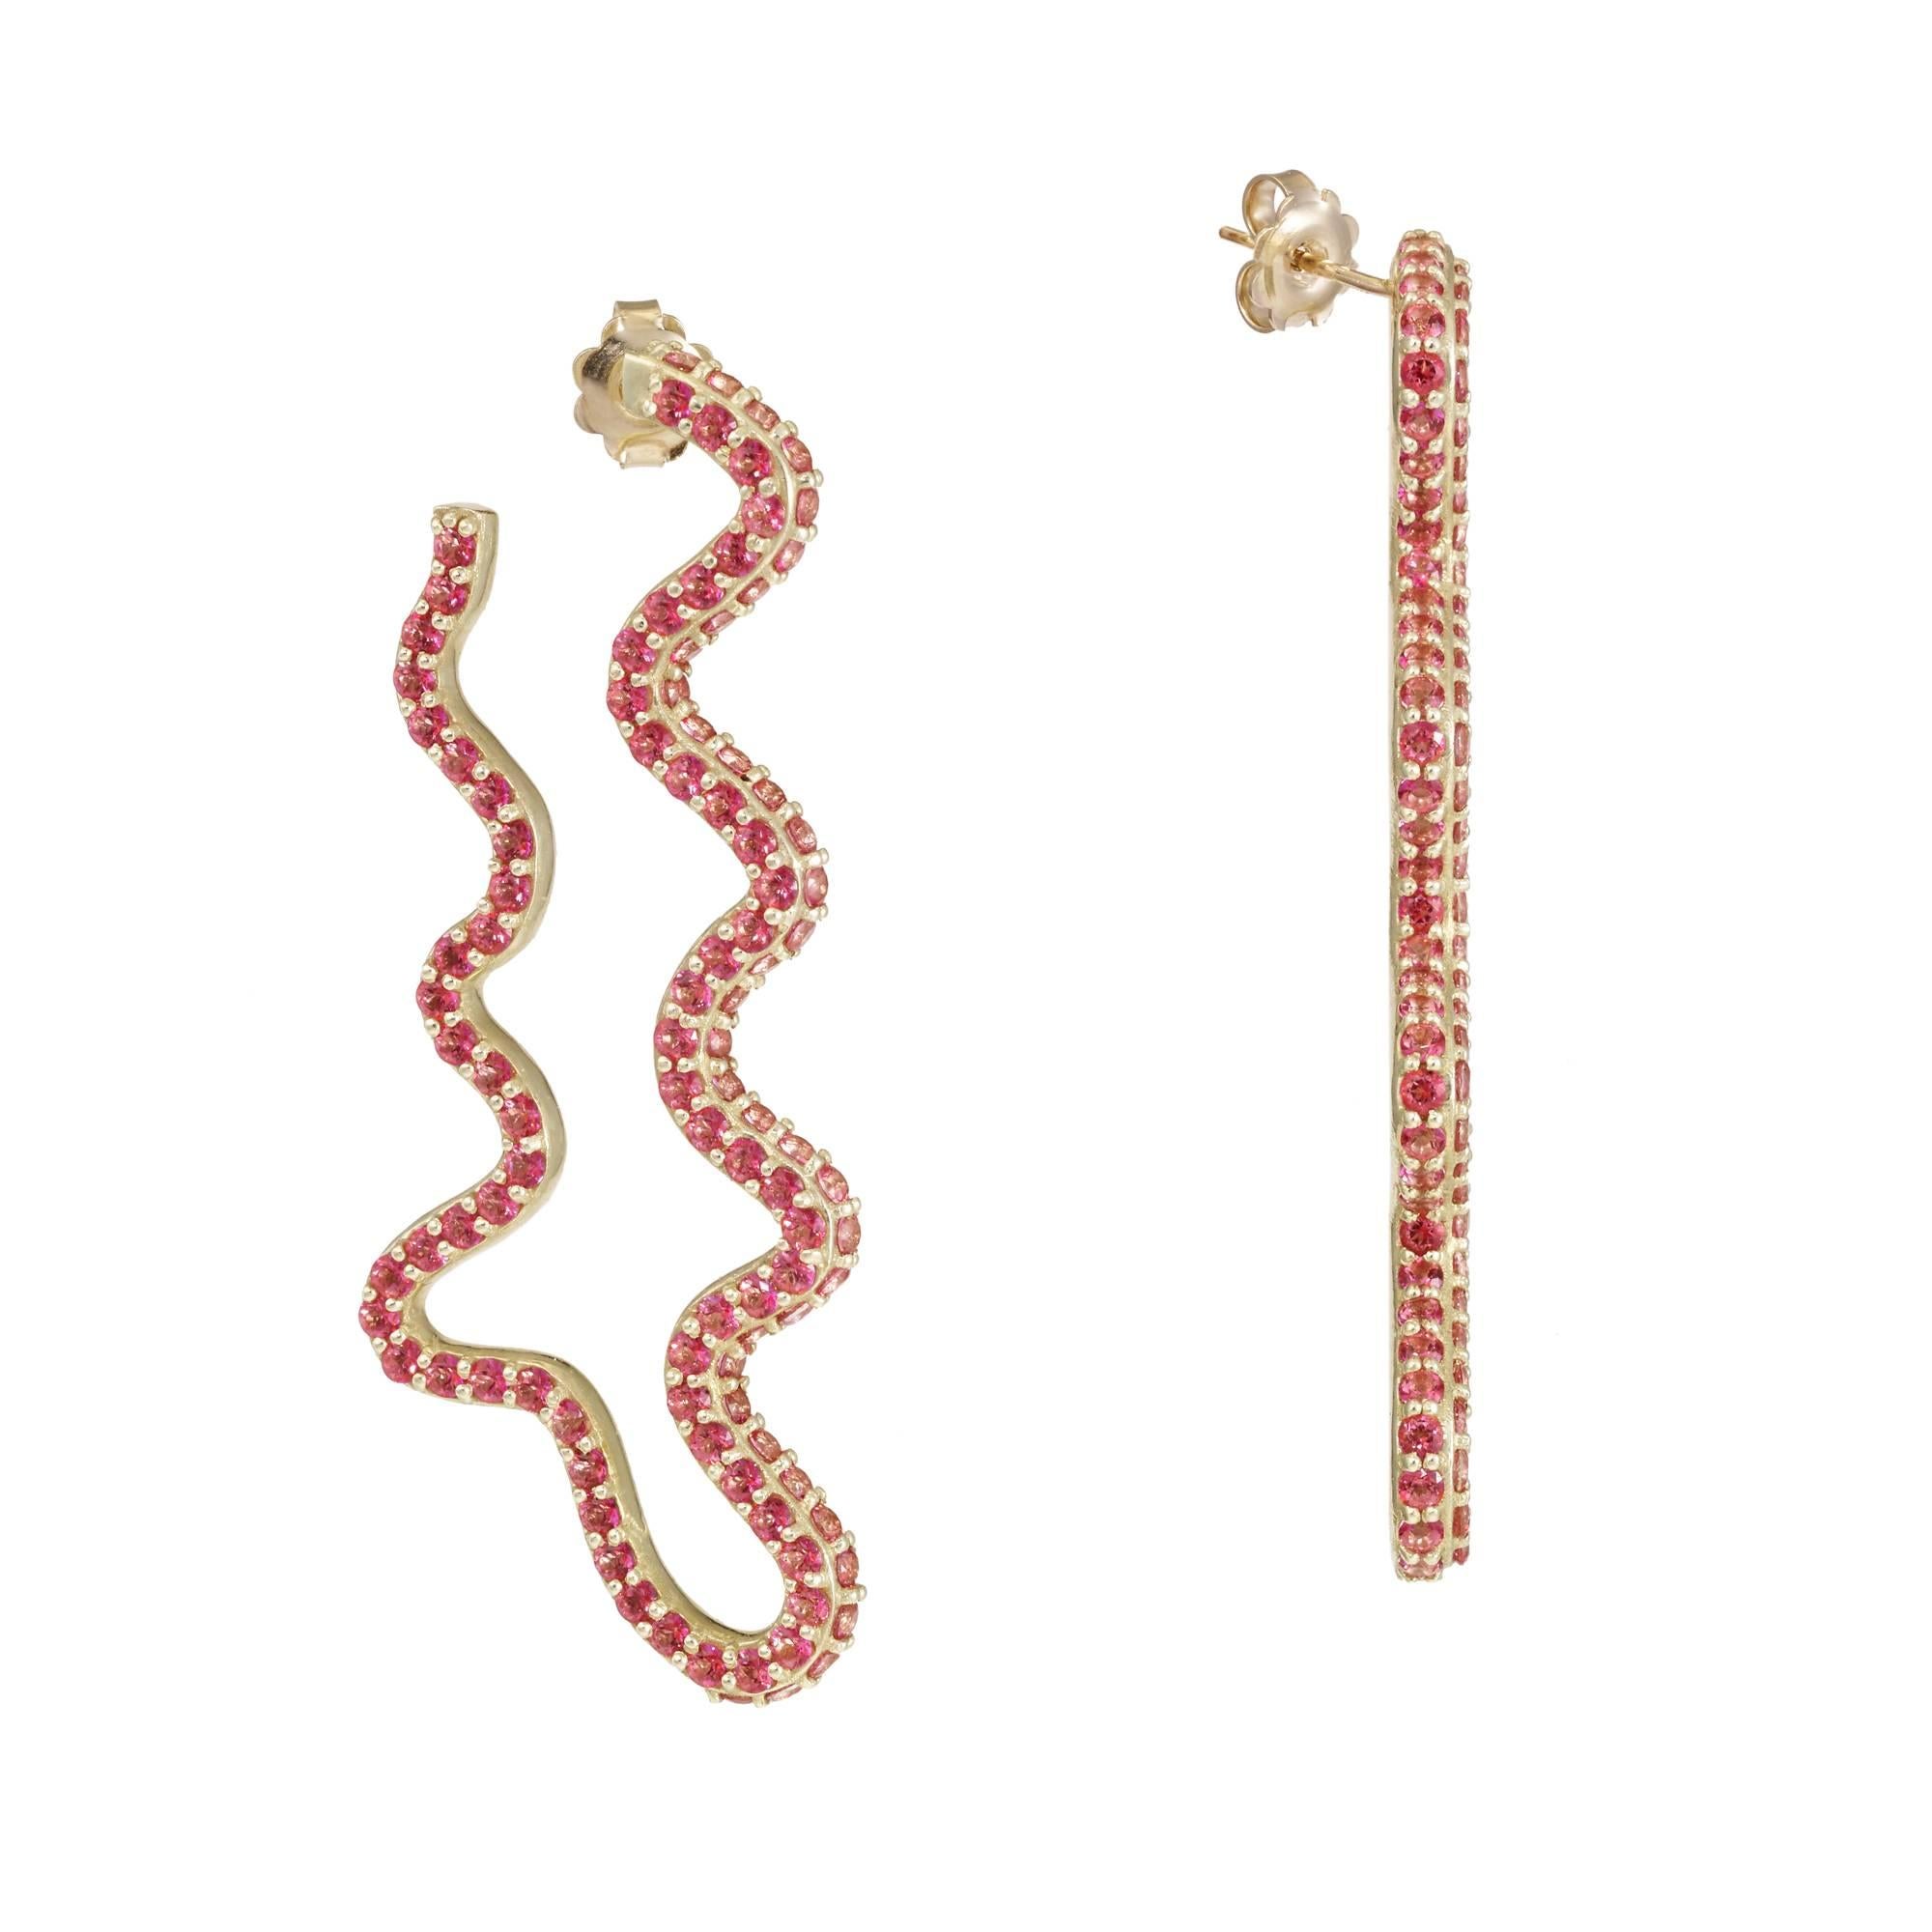 *MADE TO ORDER - 5 WEEK LEAD TIME*

Sabine Getty Wiggly Deflated Hoop Earrings in 18k yellow gold set with pink topaz

Topaz: 9.2ct

Yellow, pink, green and blue. Four colours inspired by the Memphis Group, the kookiest of Made in Italy